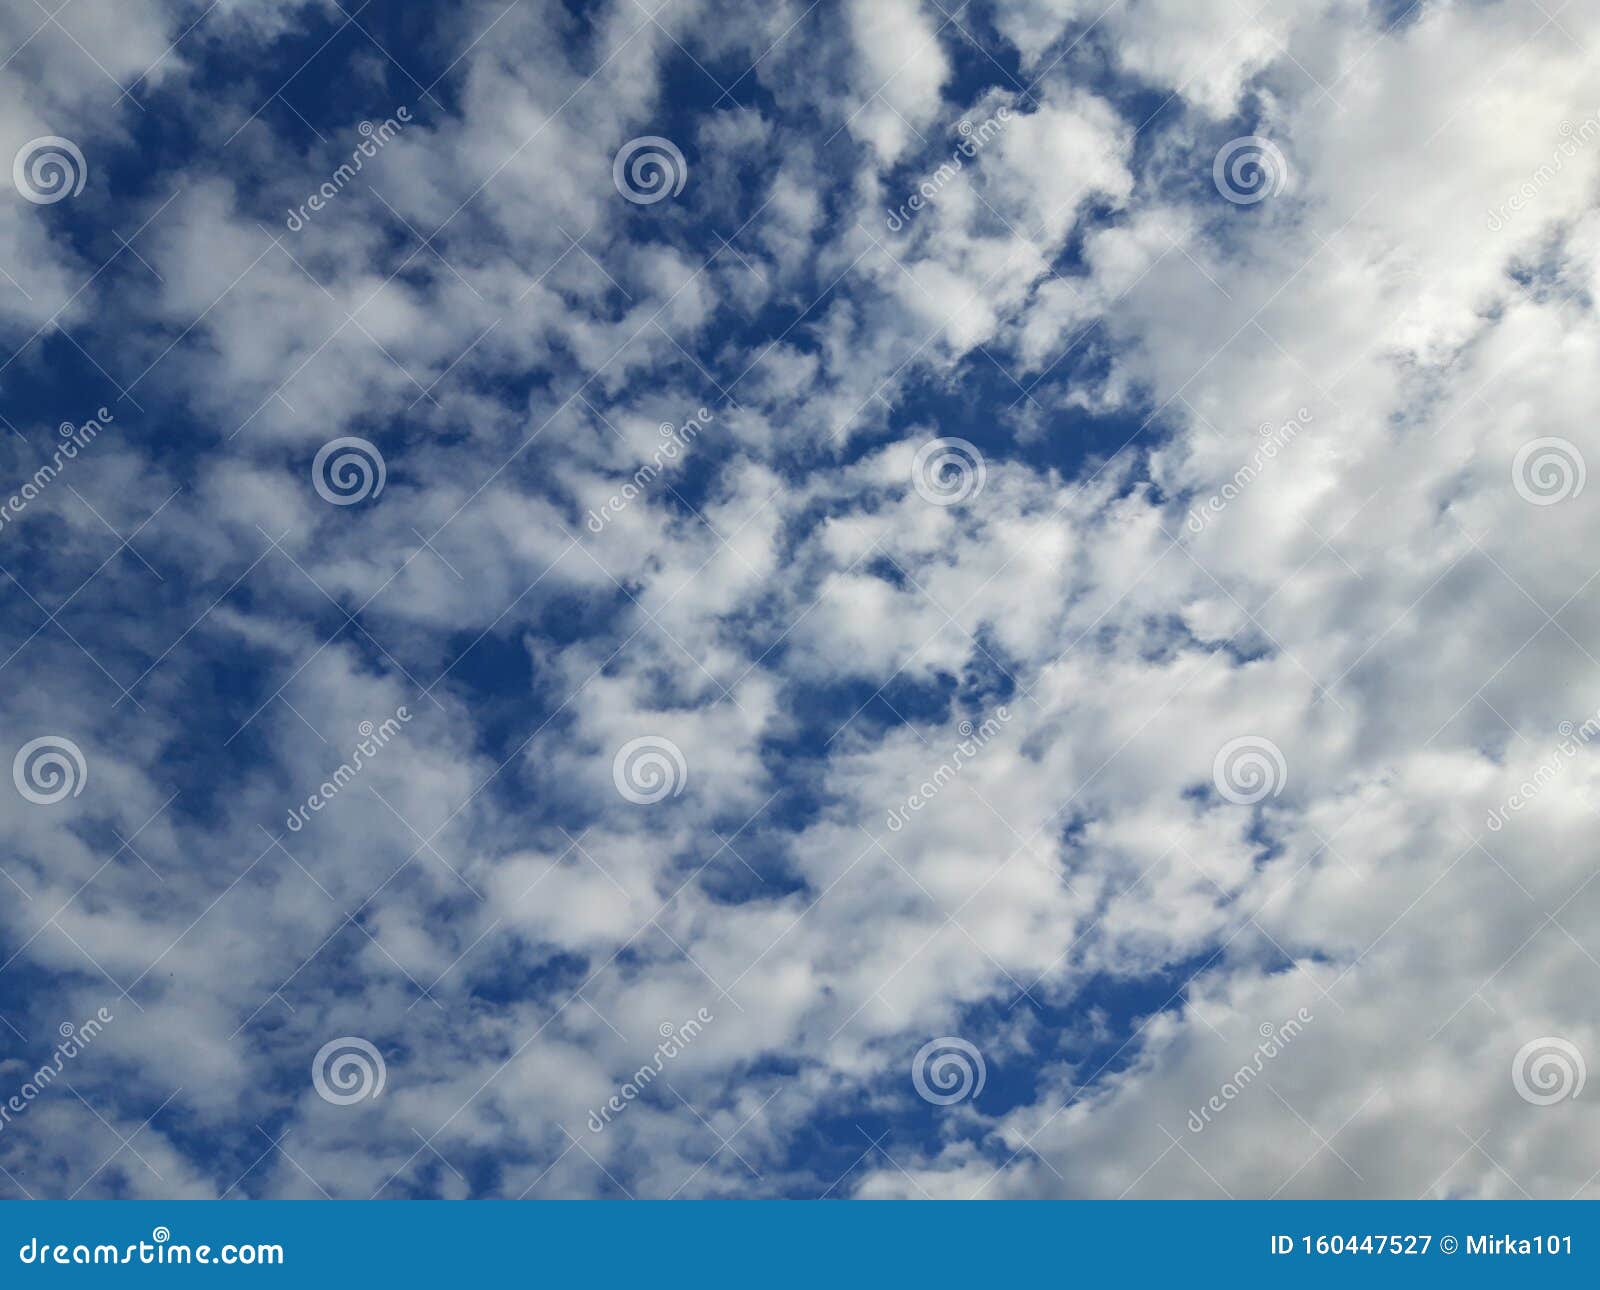 Dark Blue Sky With Big Clouds Immensity Space Perfect As A Mobile Wallpaper Stock Image Image Of Space Clouds 160447527